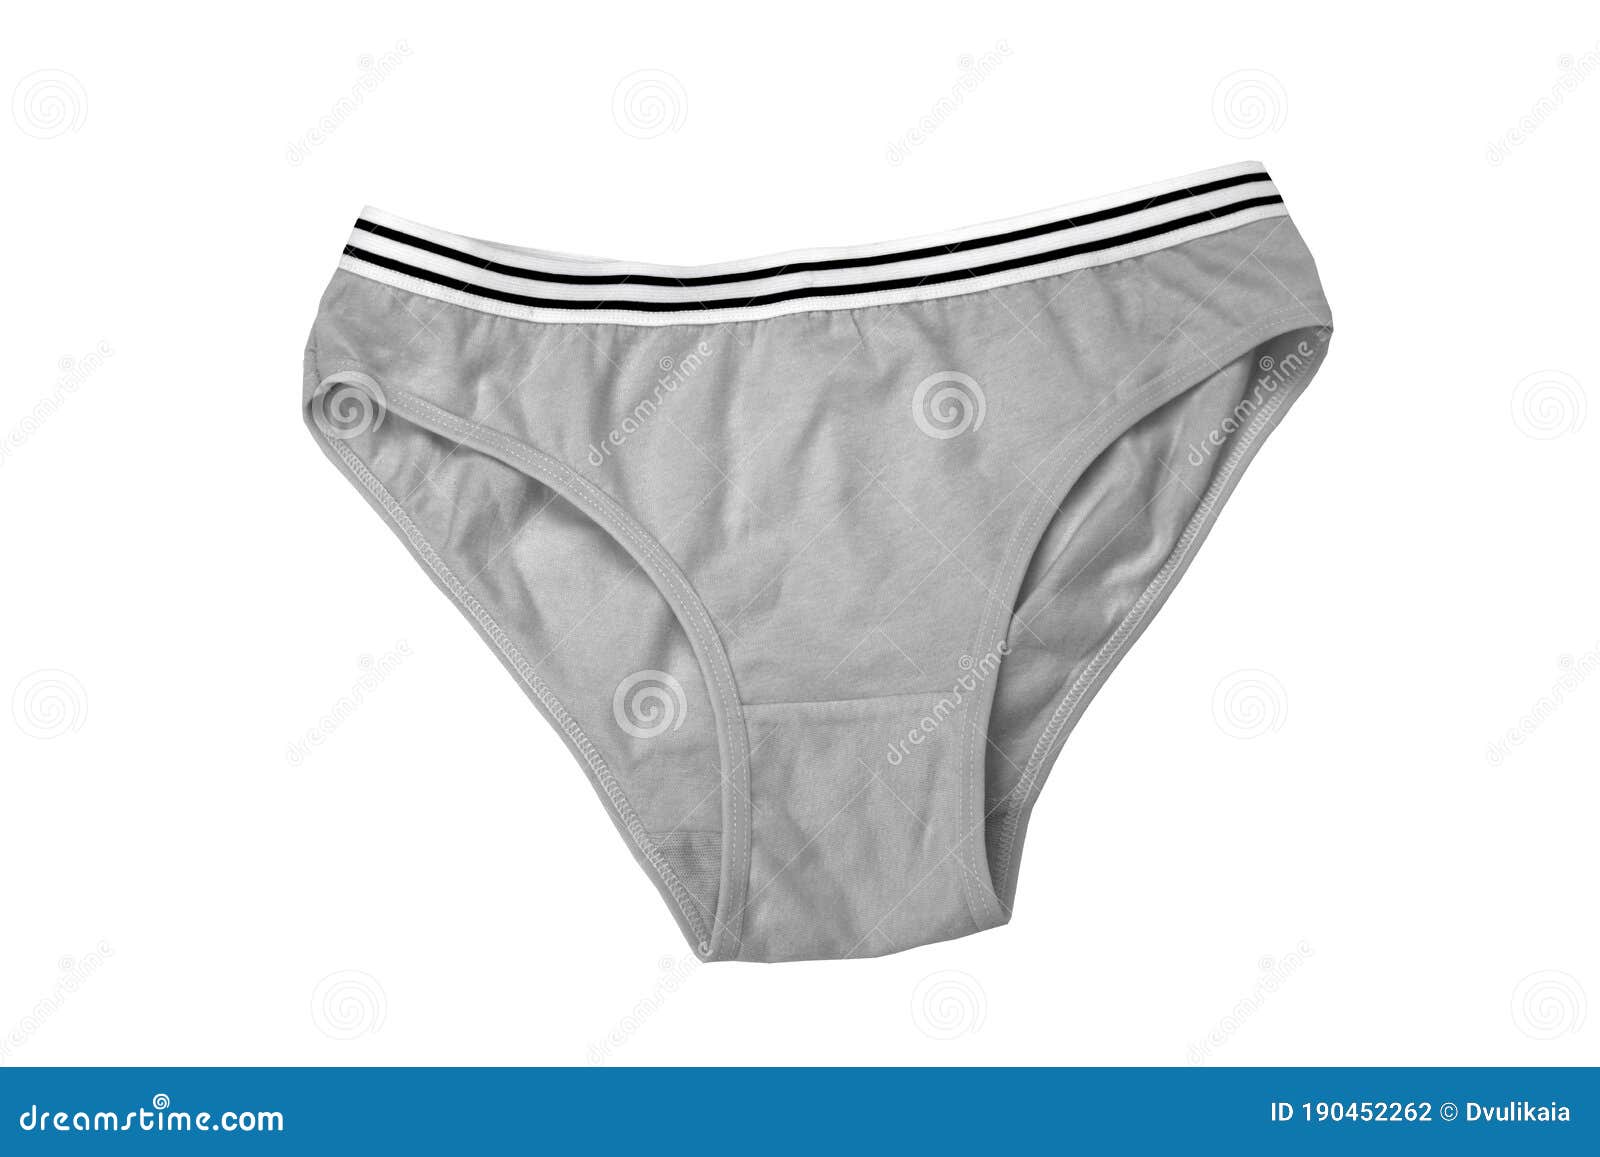 Panties Isolated on a White Background Stock Photo - Image of knickers ...